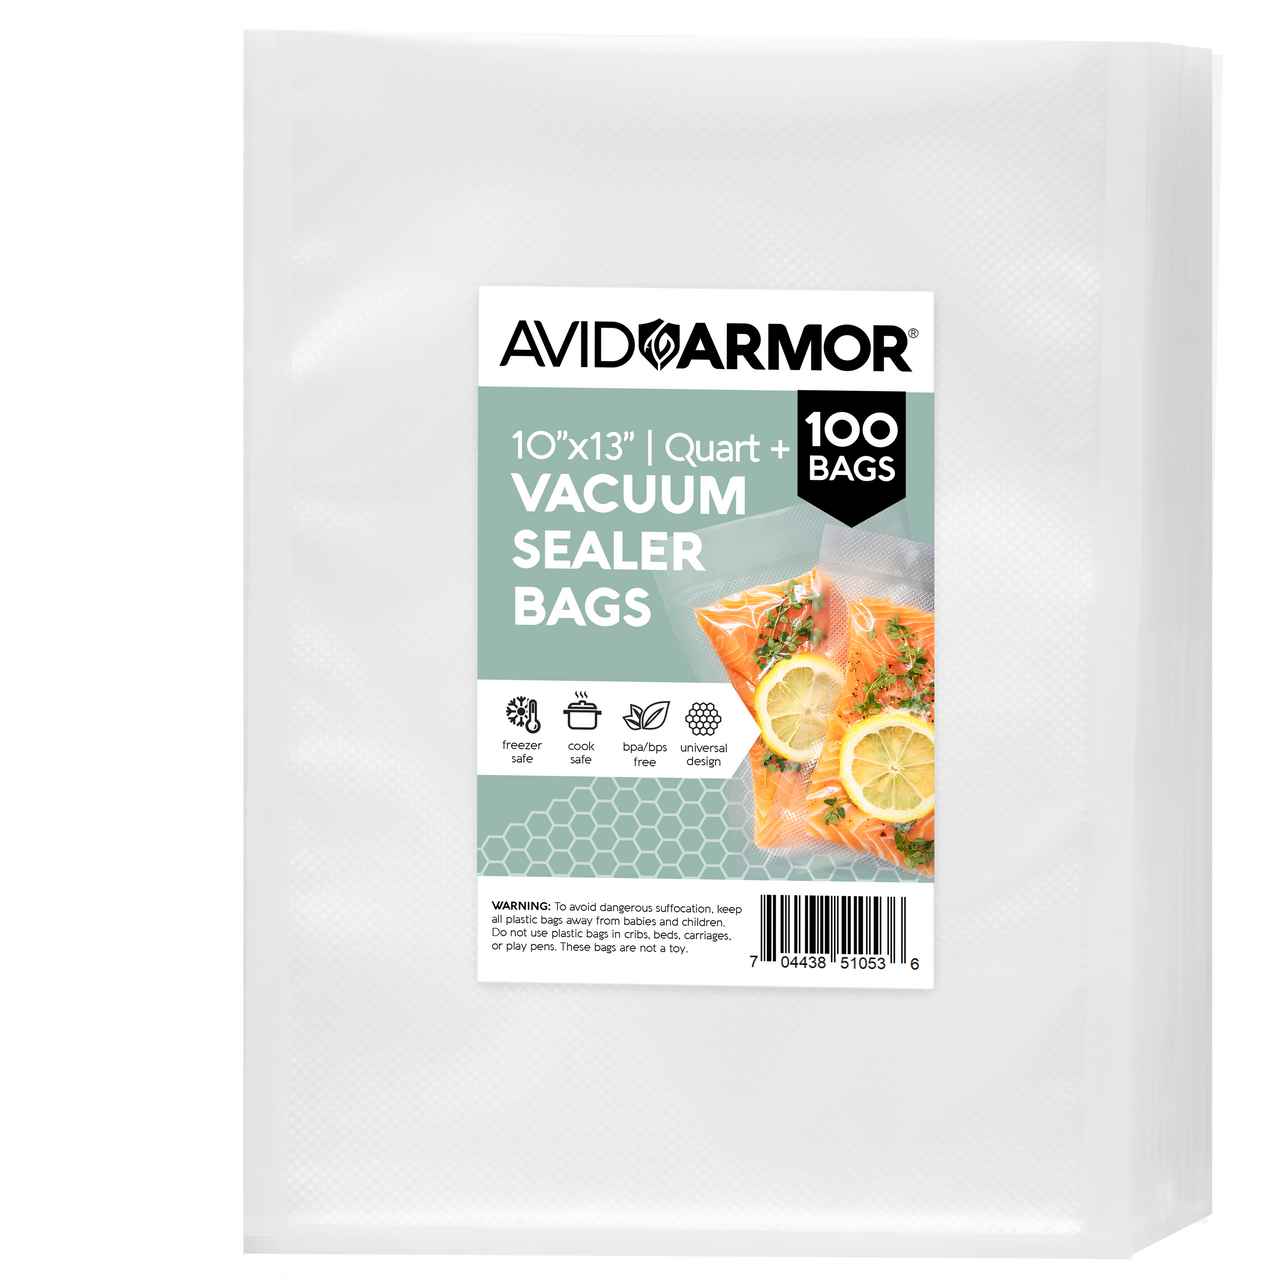 Vacuum Meal Seal Food Save Bags - Pre-Cut Quart Size Plus (10x13) from Avid Armor